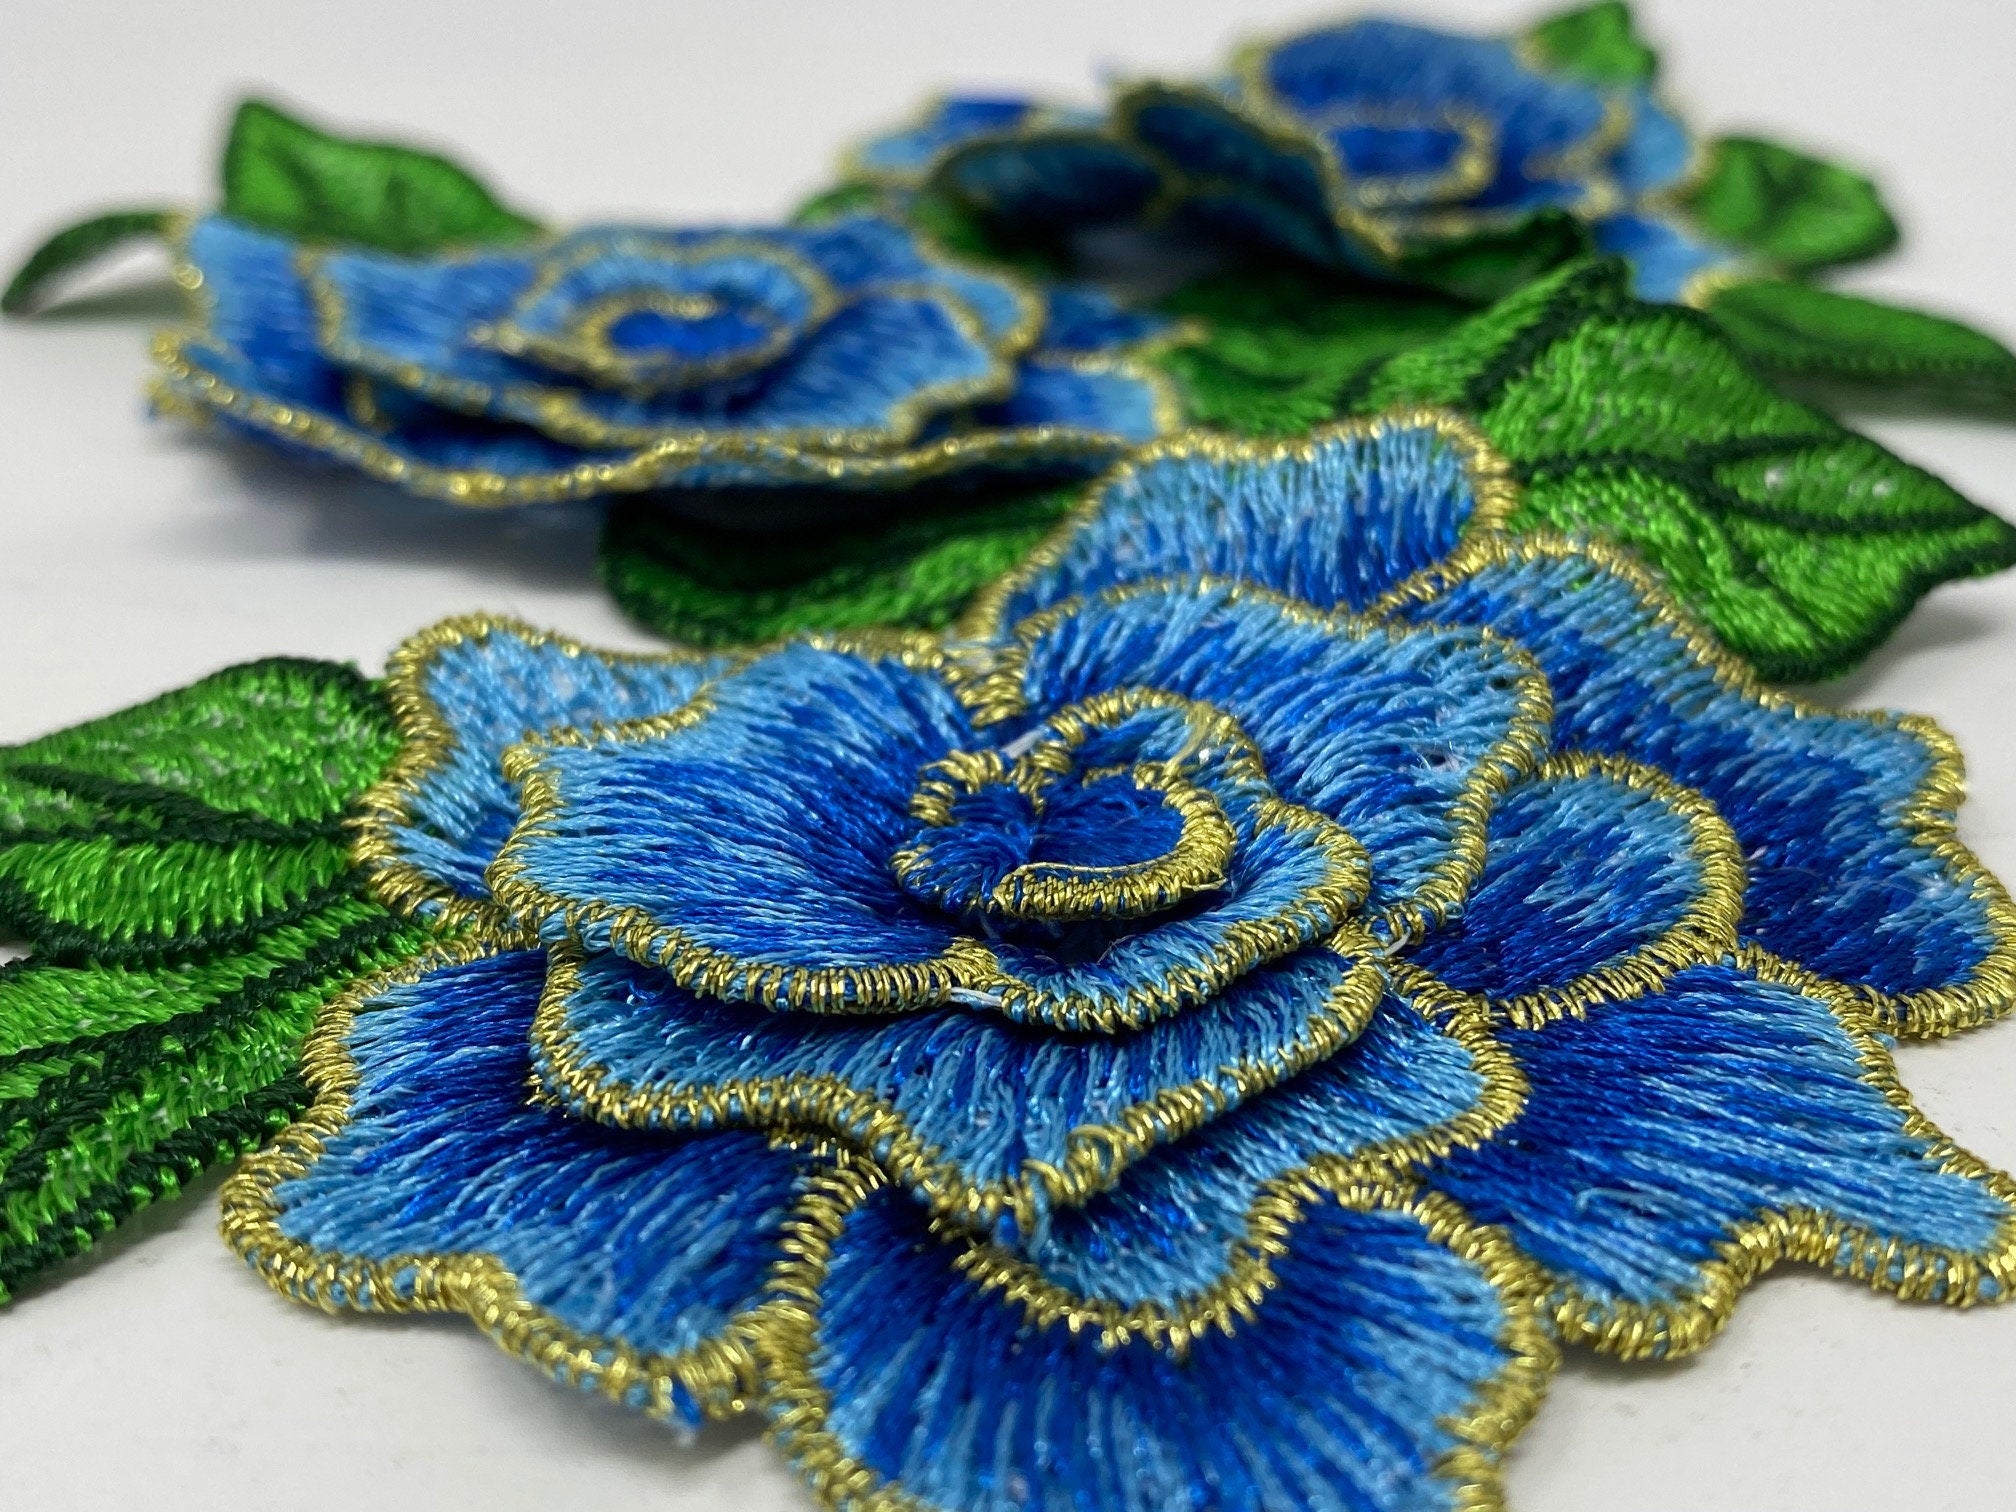 NEW, 2 pc set, Blue & Gold Roses (size 4-inches), matching lace